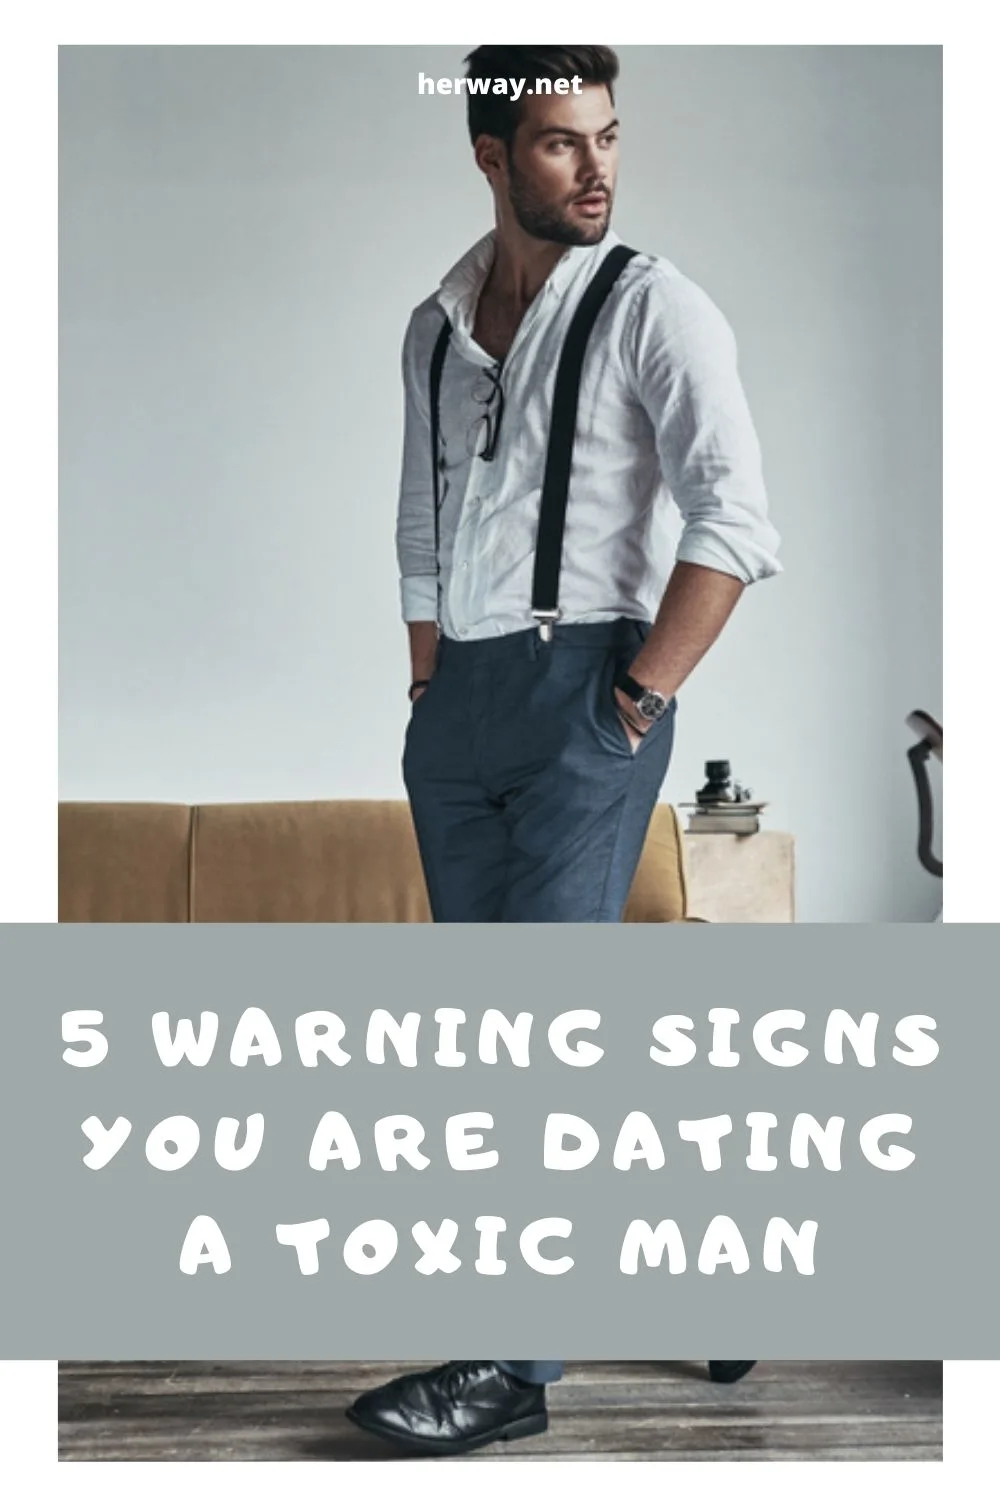 5 Warning Signs You Are Dating A Toxic Man